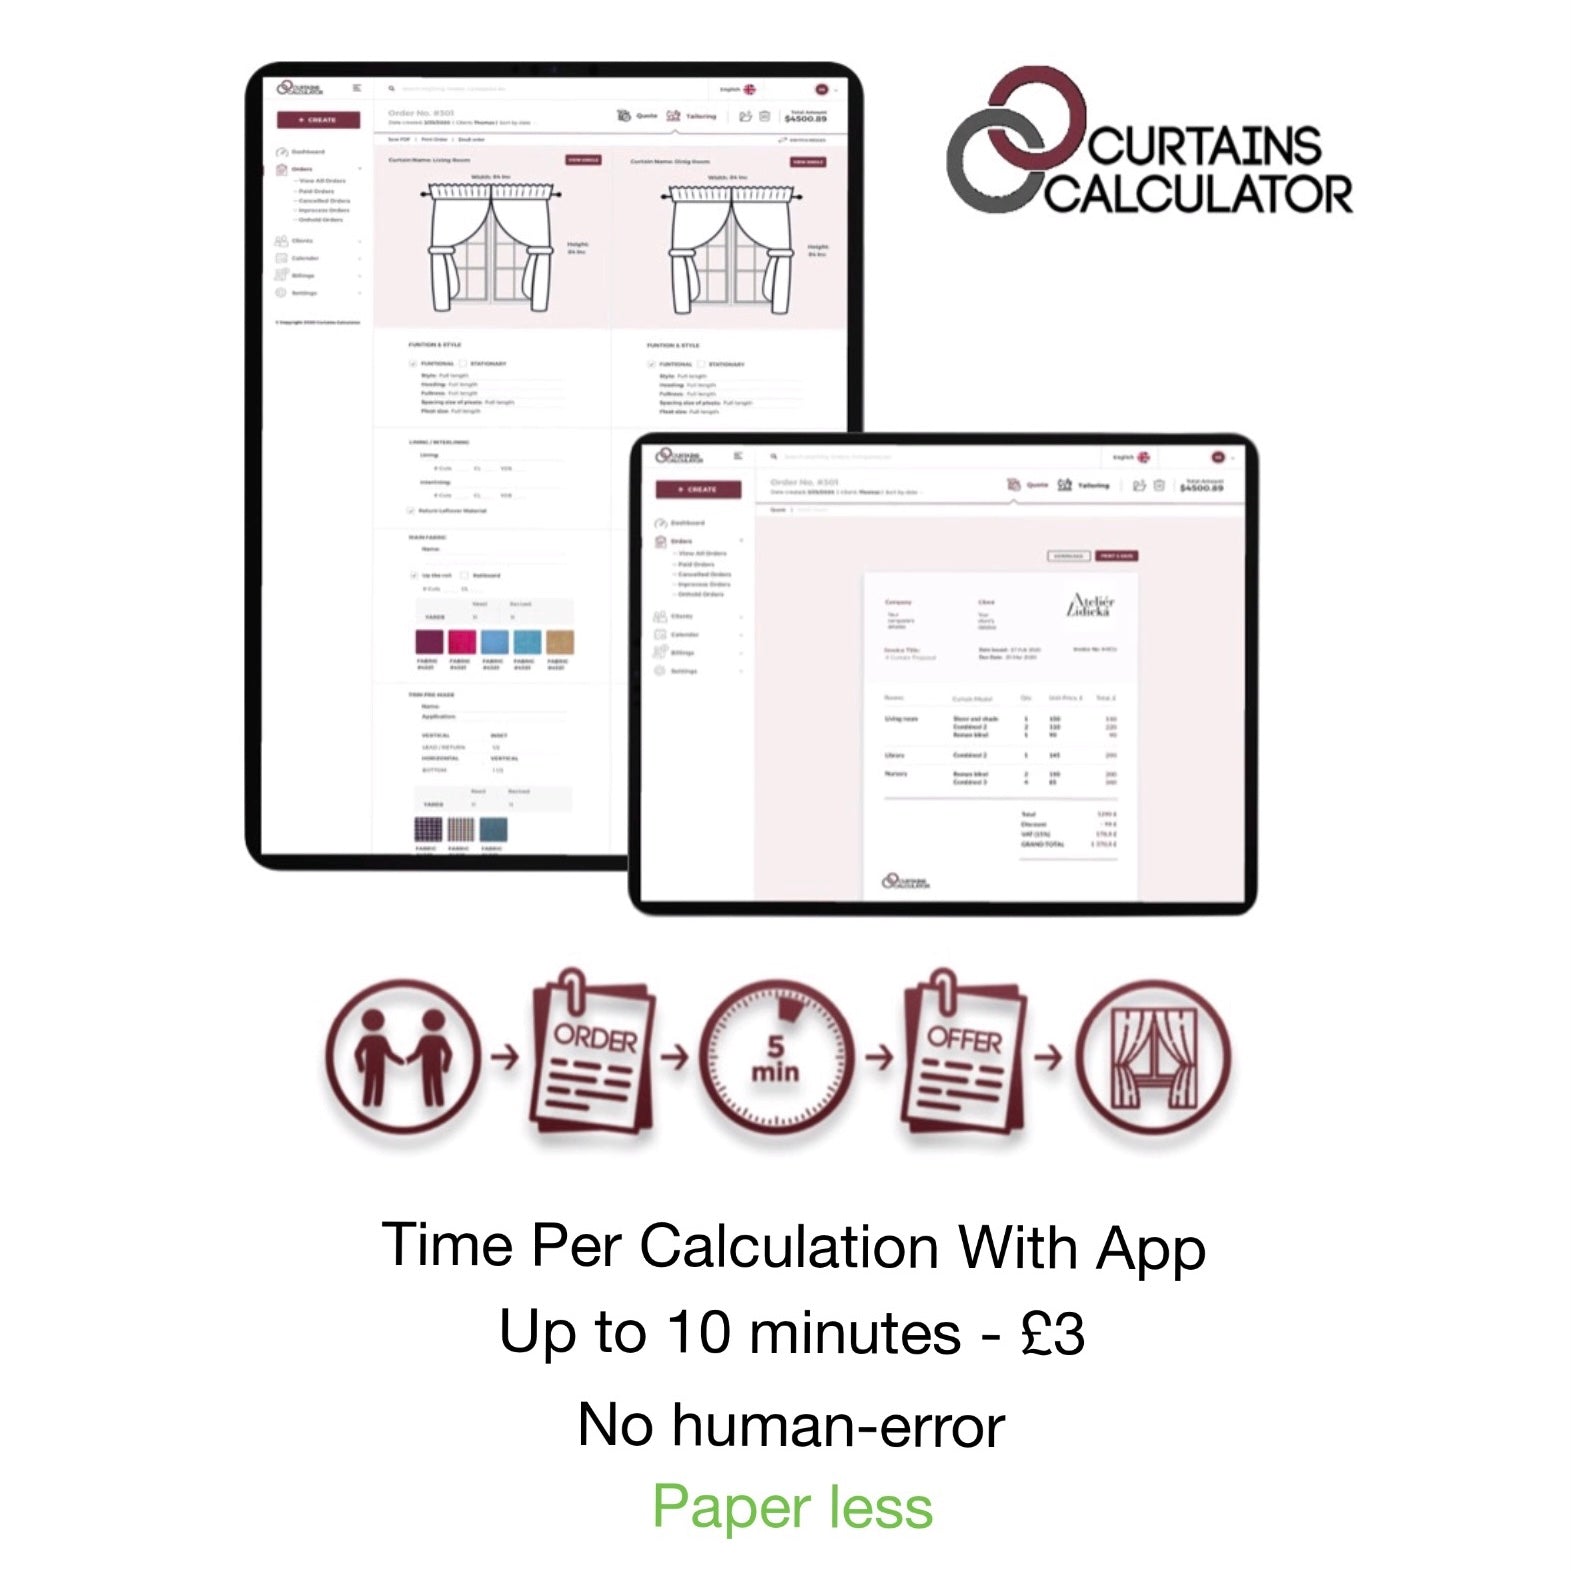 Curtains Calculator application for soft furnishing and curtian business owners and sales people. Assist sales people during the sales process in curtian and blind store